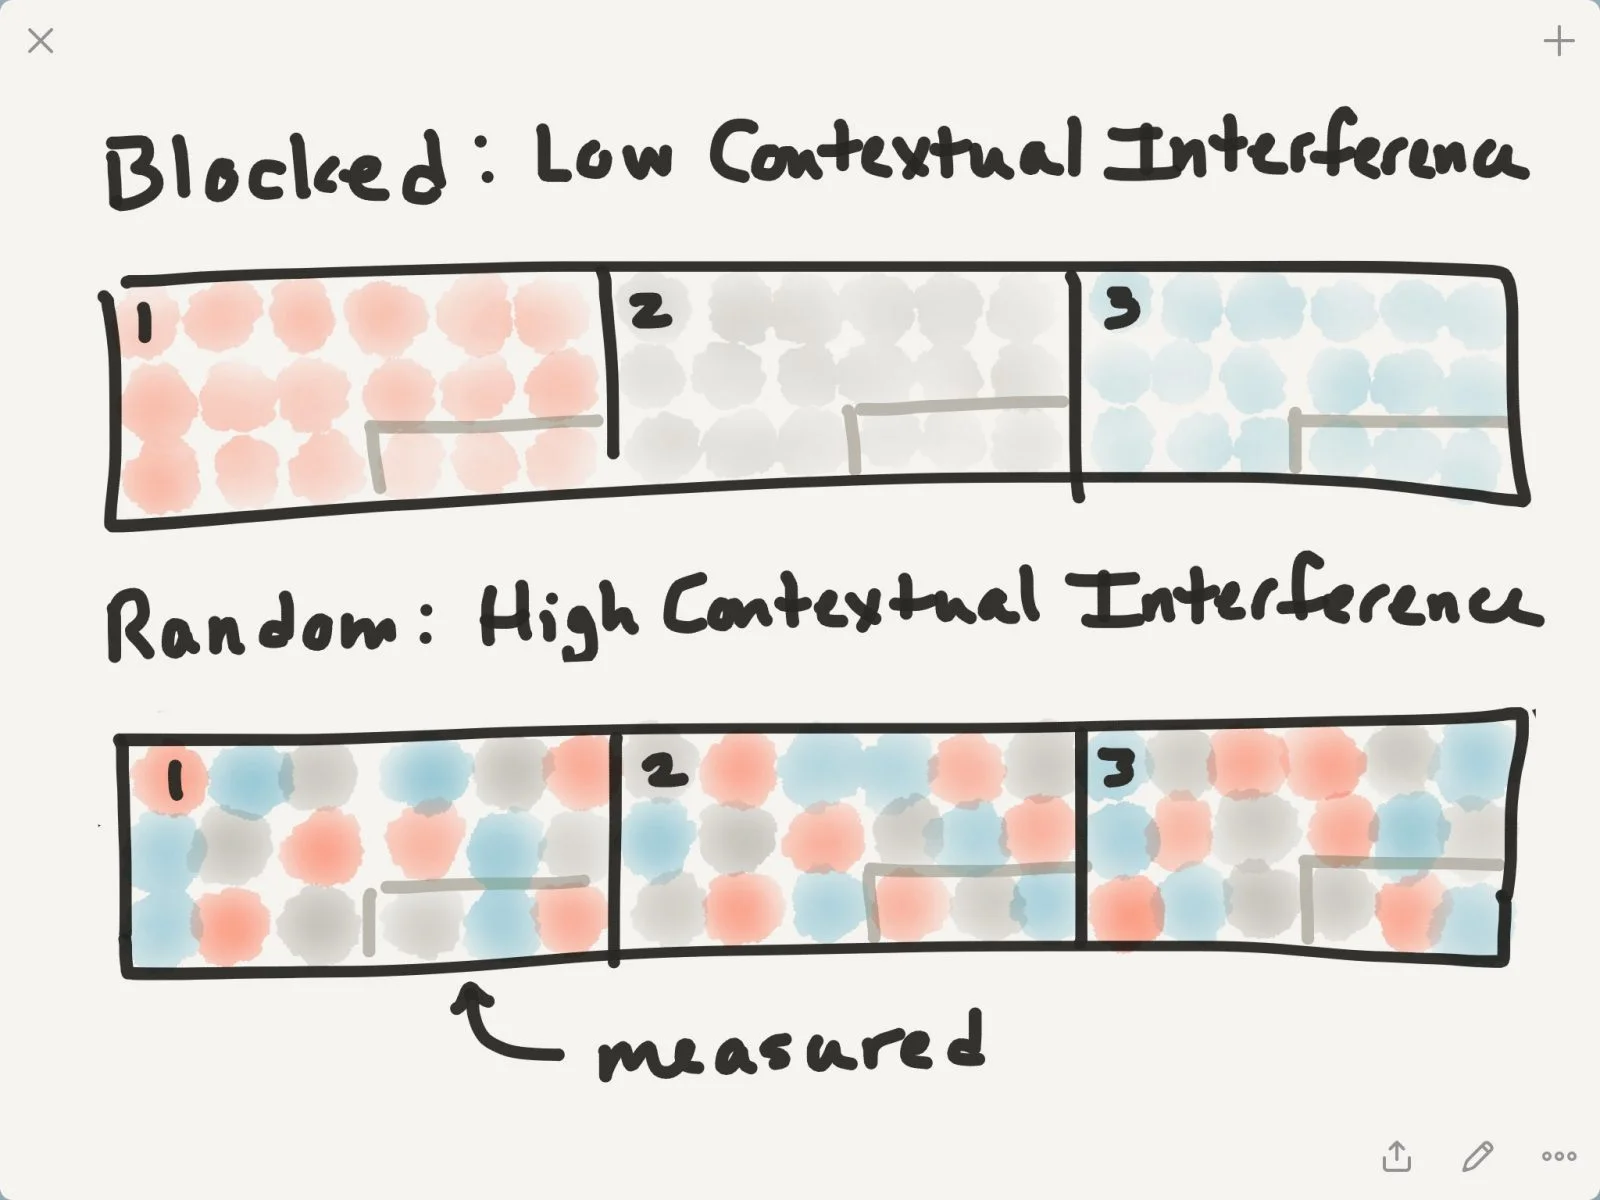 Why high contextual interference?